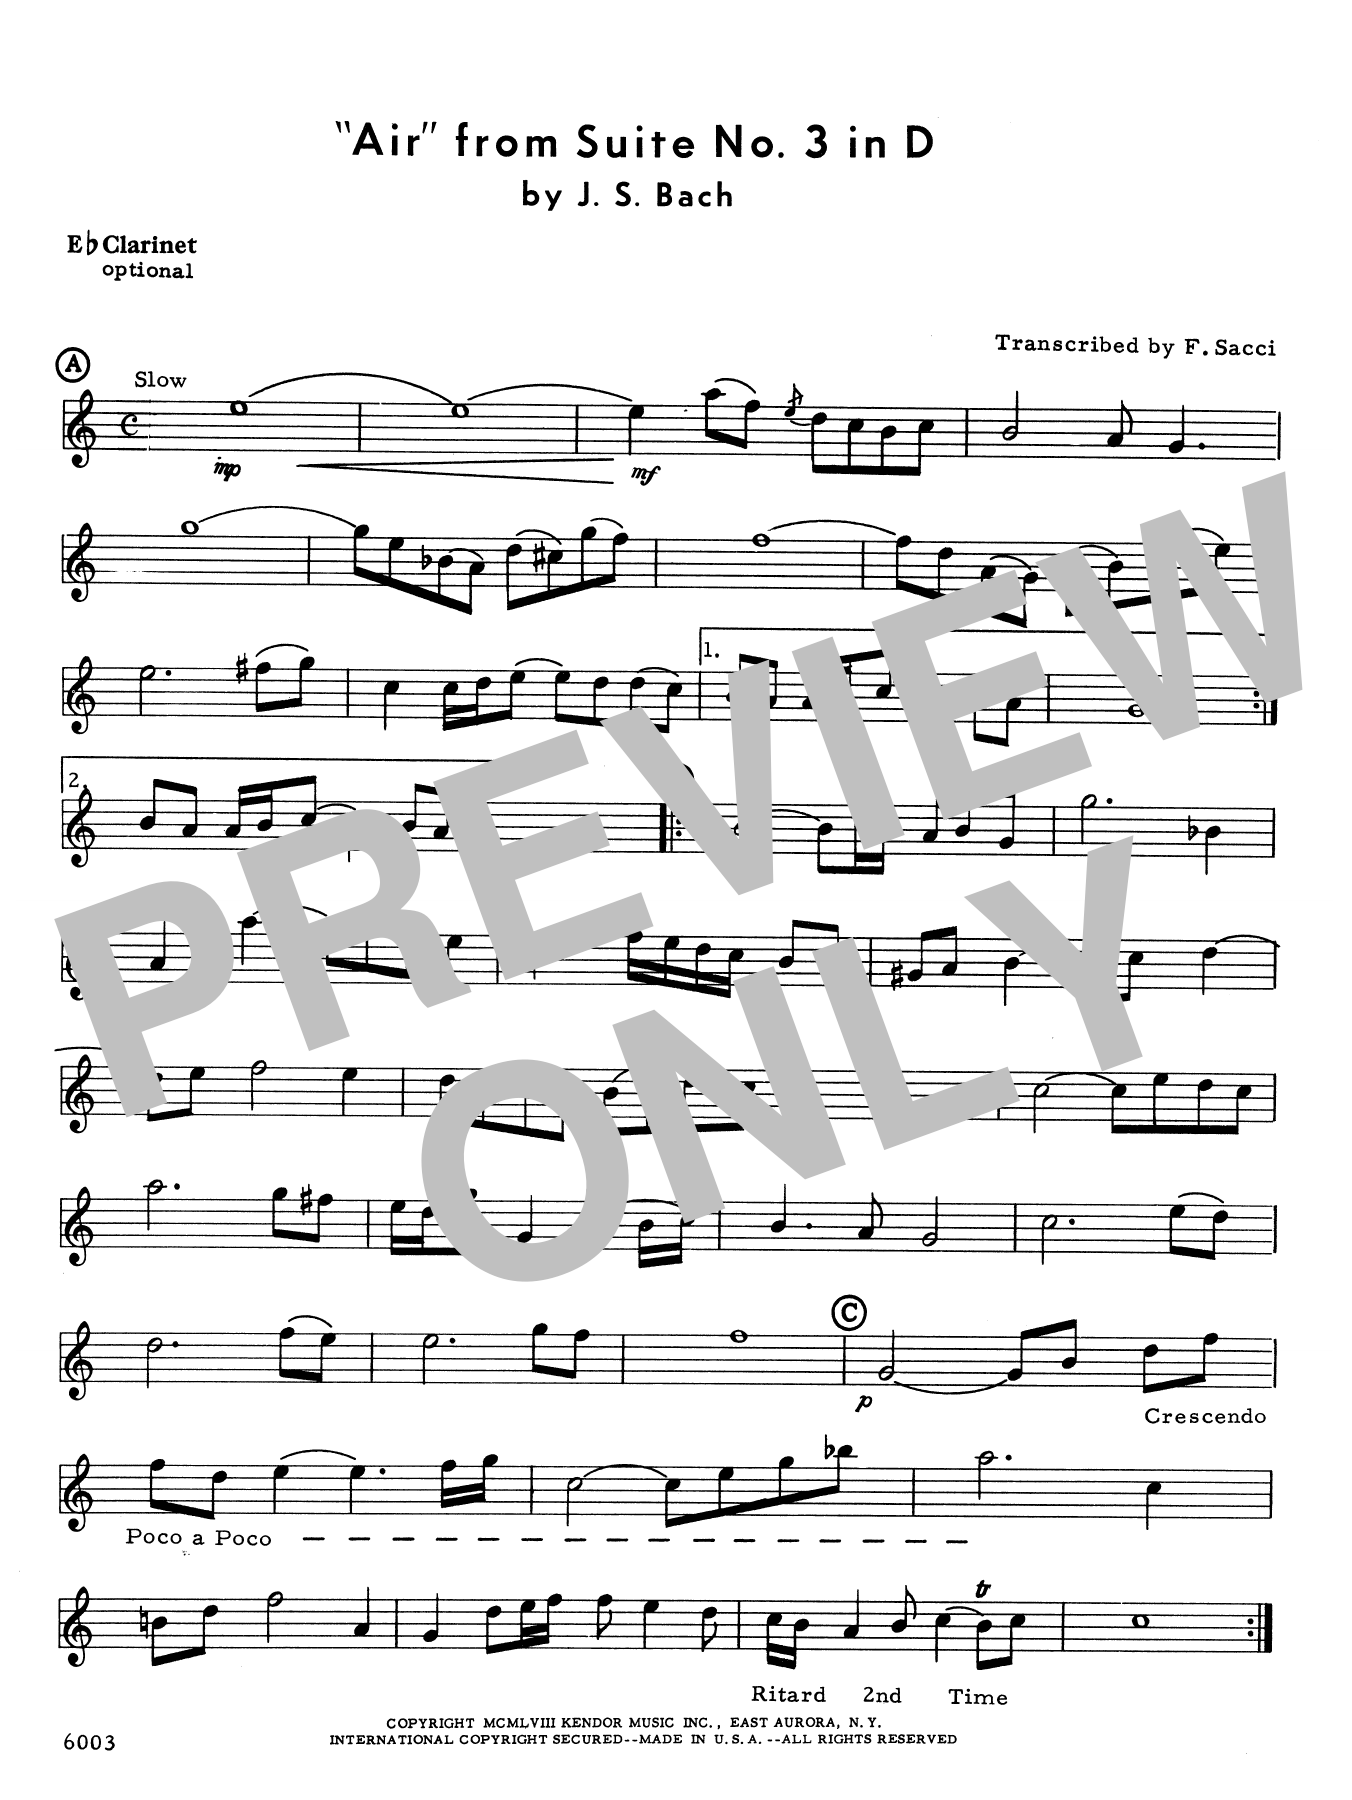 Download Frank J. Sacci Air From Suite #3 In D - Eb Alto Clarin Sheet Music